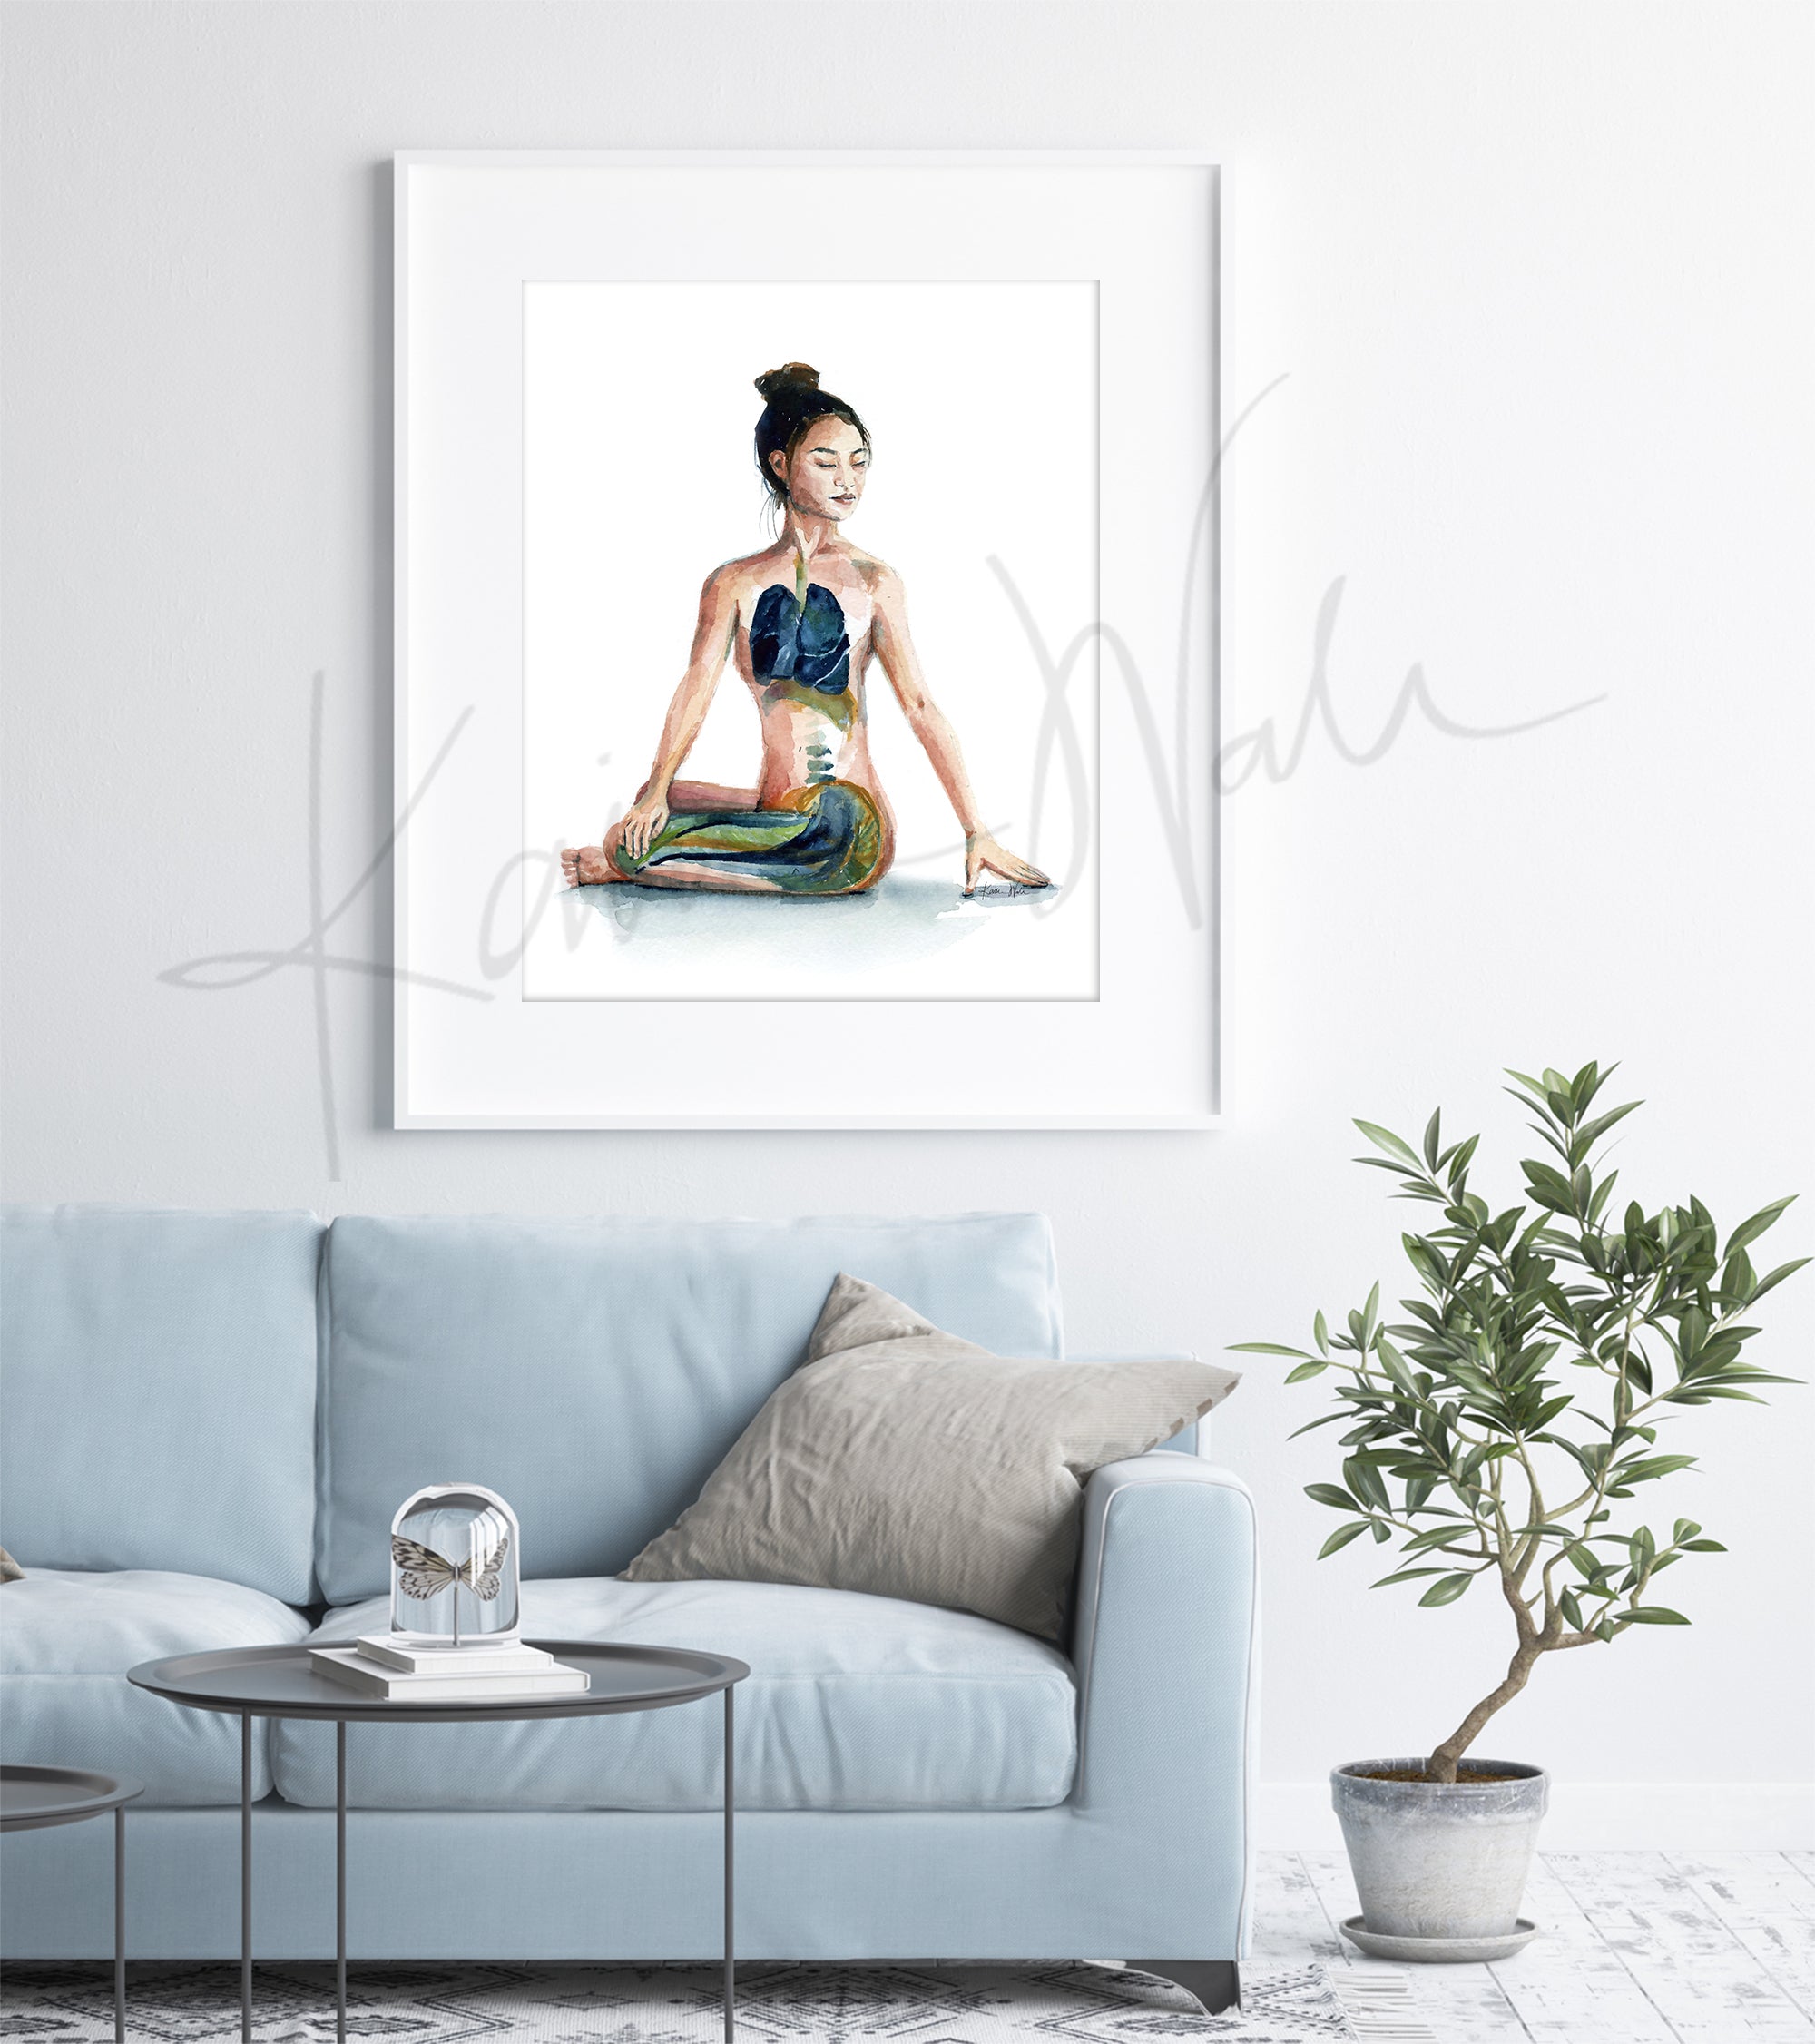 Framed watercolor painting of a woman with her eyes closed in a seated yoga pose. The painting is hanging over a blue couch.